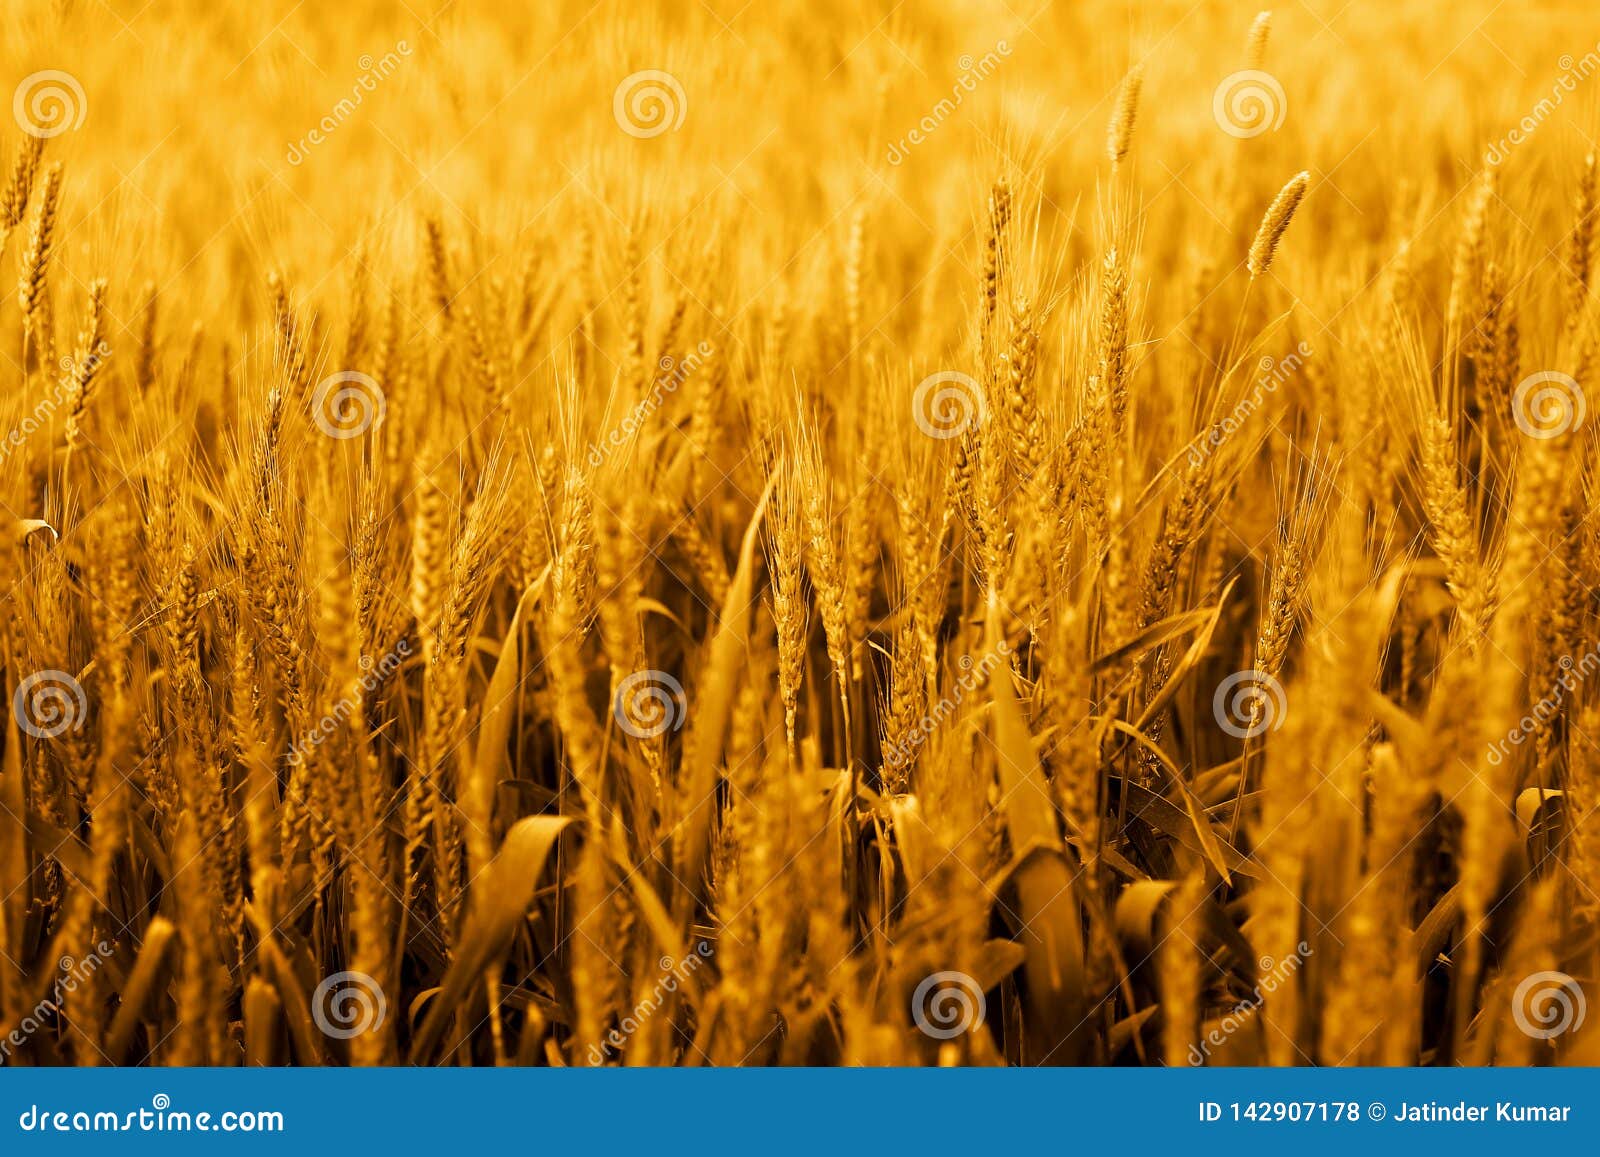 Picture of Wheat Fields for Punjabi Culture Stock Photo - Image of ...